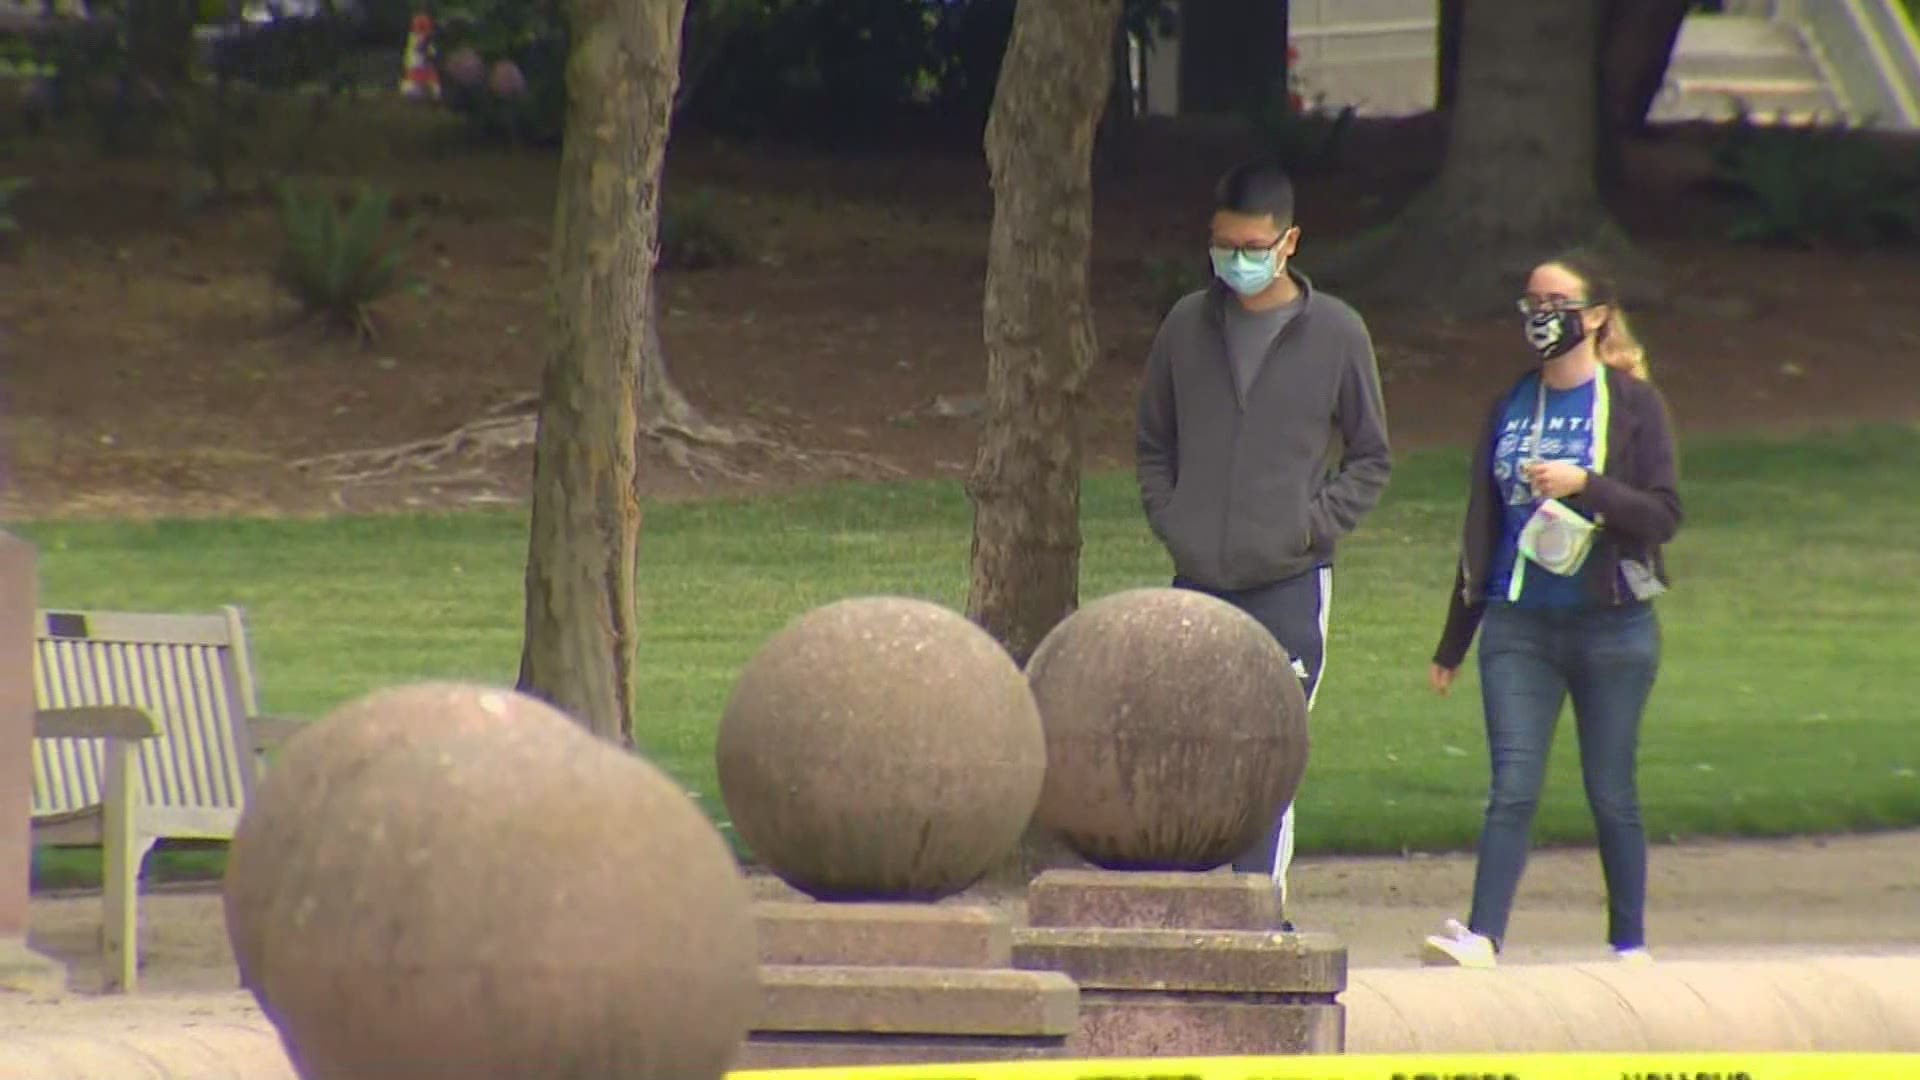 Public Health - Seattle & King County tweeted that it's considering whether ending the indoor mask mandate is the best option for the county and its residents.